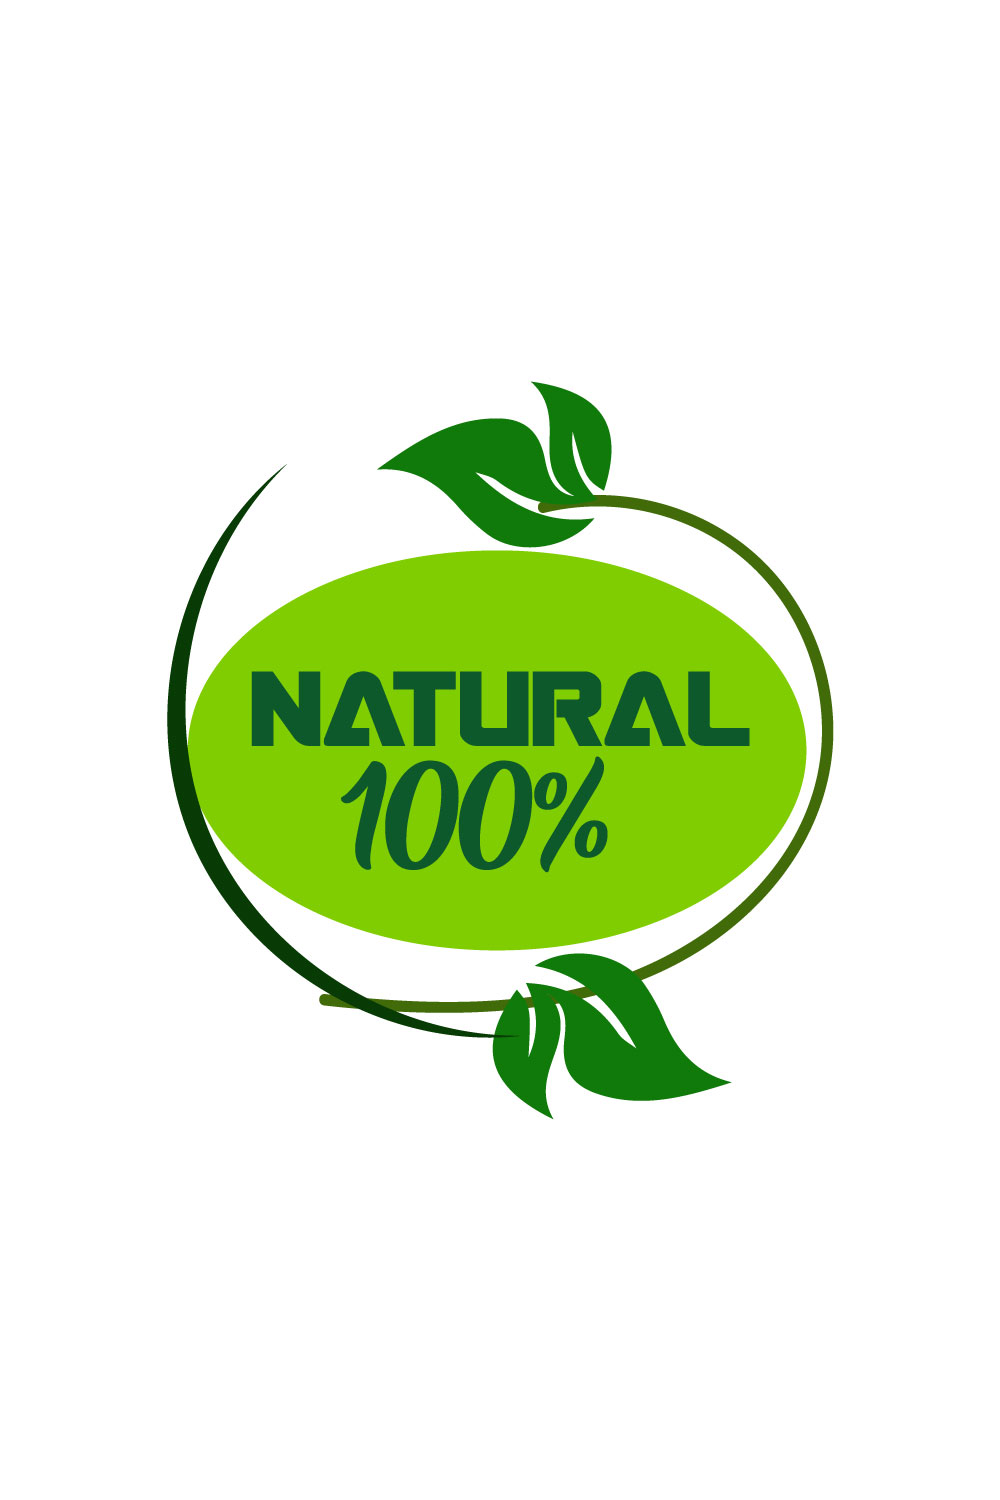 Free green product logo pinterest preview image.